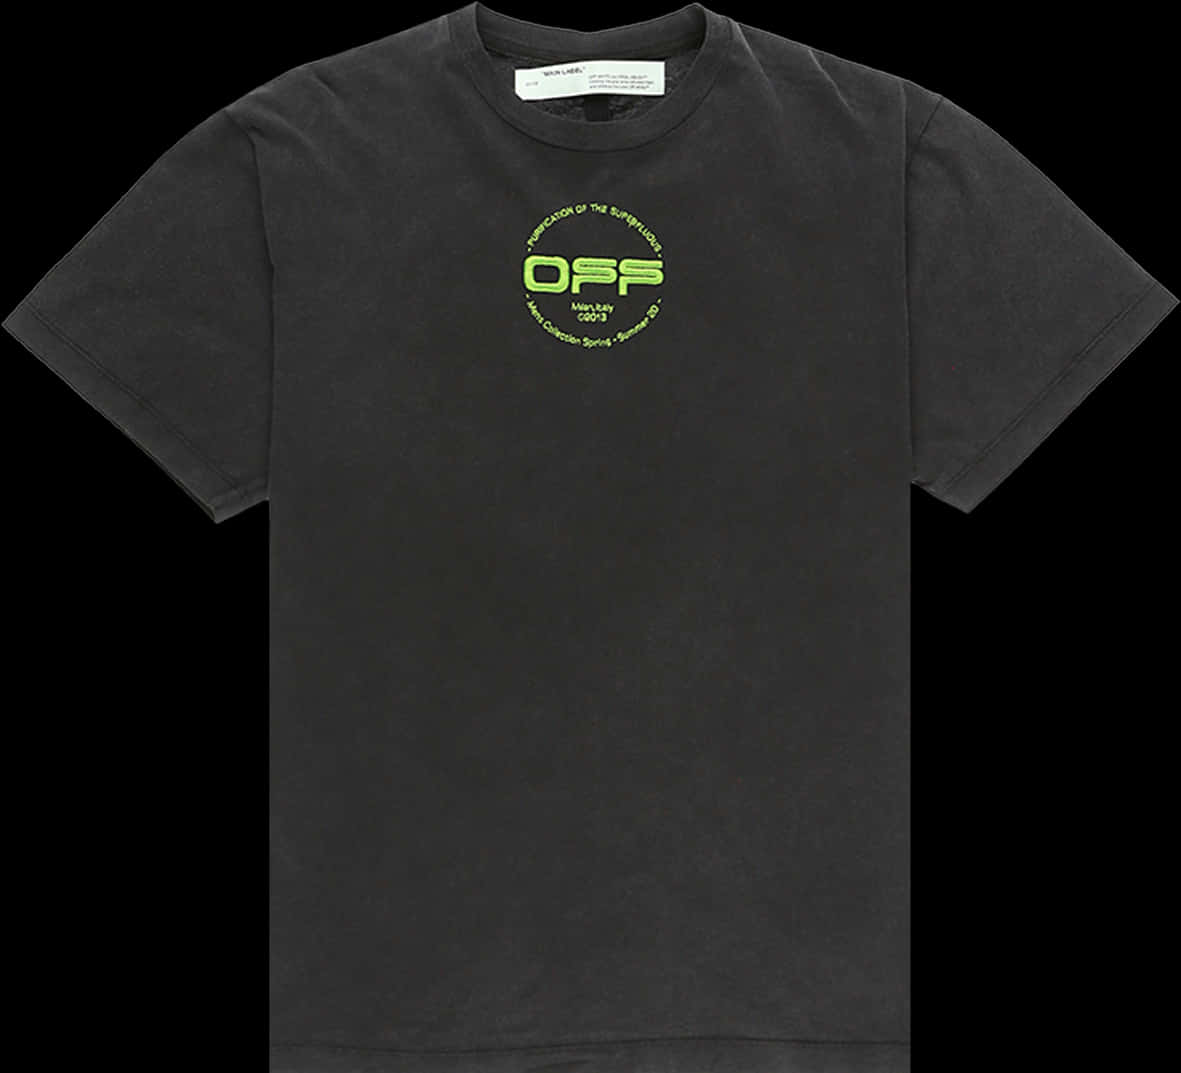 A Black T-shirt With Green Text